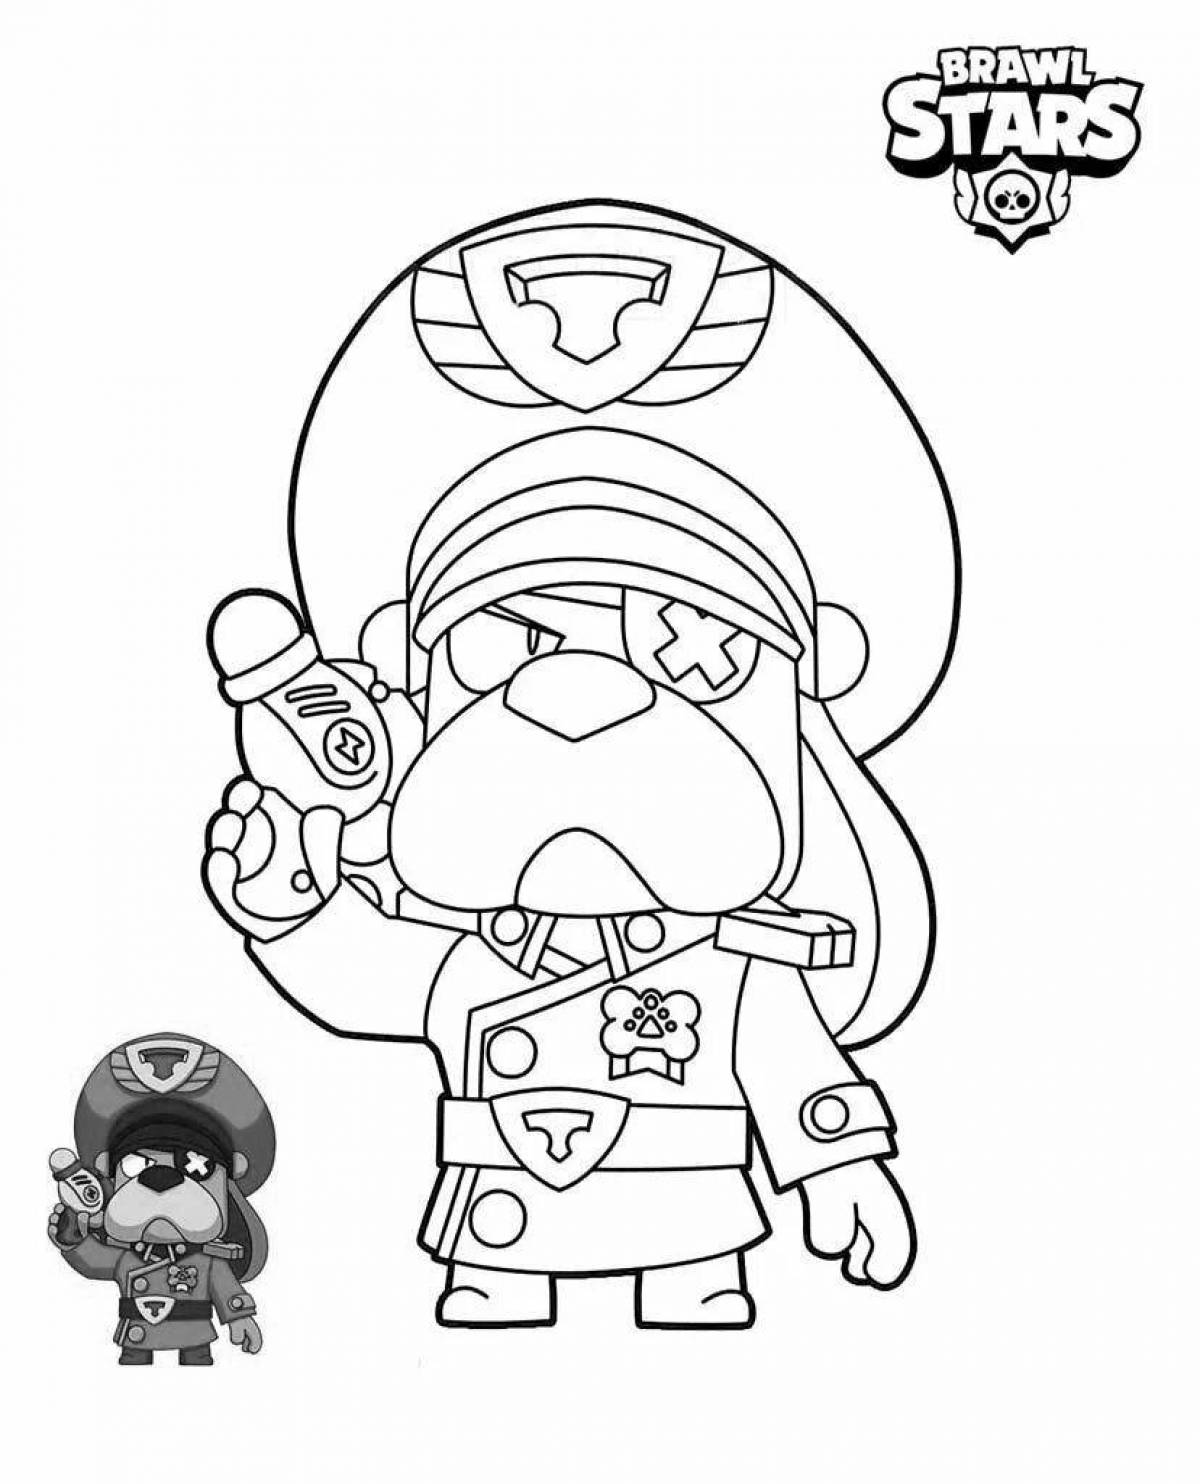 Charming sam from brawl stars coloring book